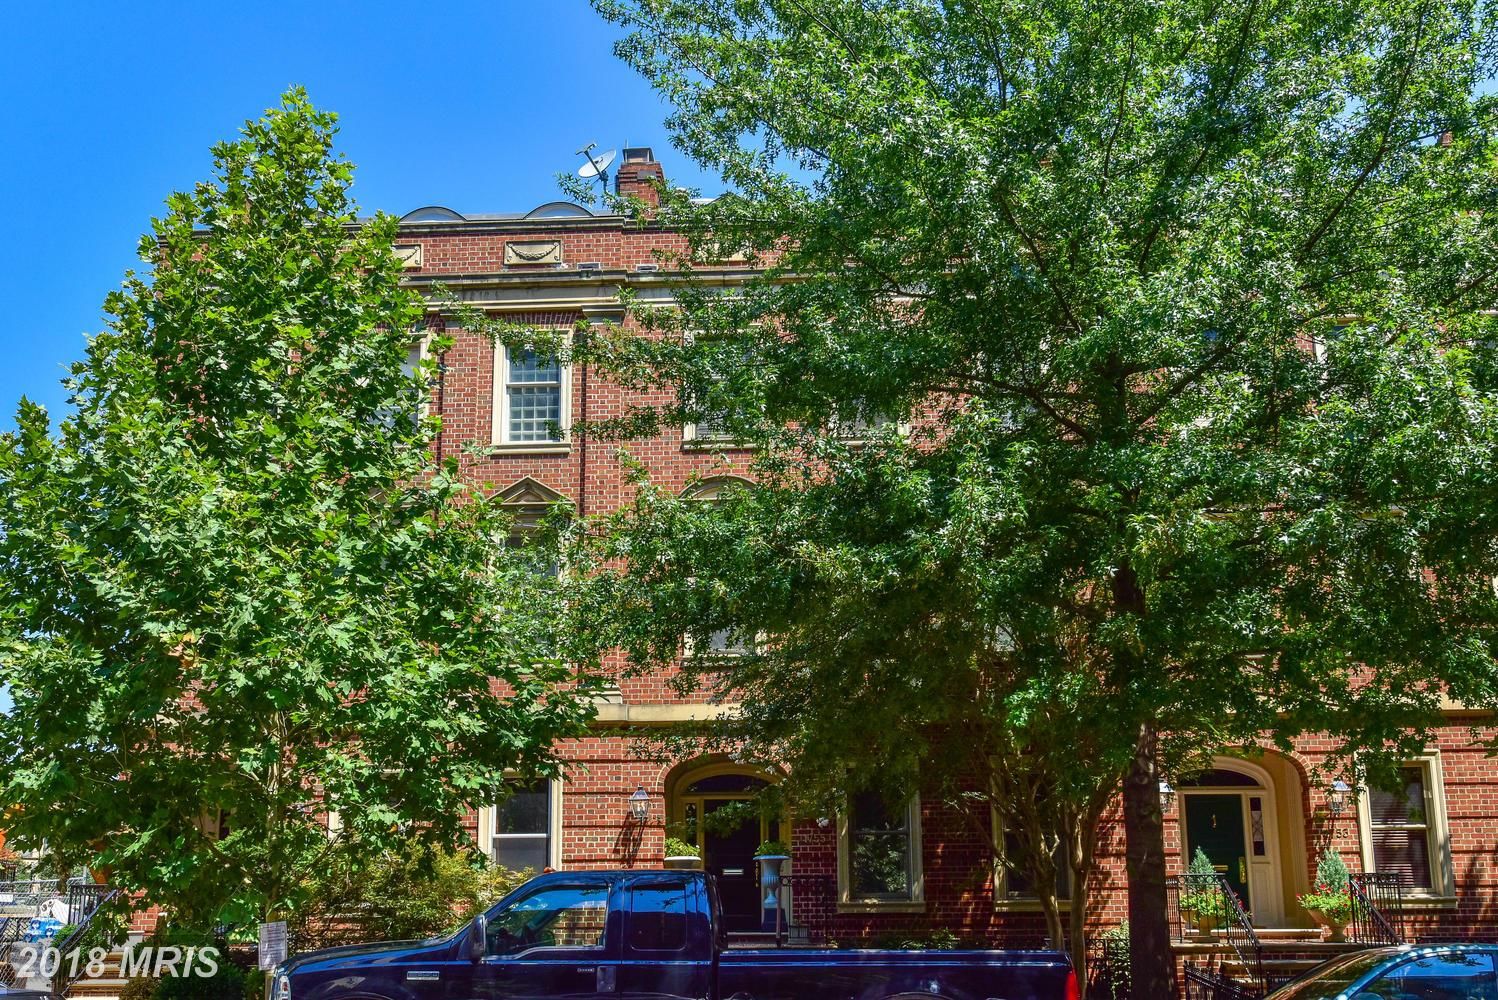 6. $2,800,000

1755 P Street NW
Washington, D.C.

This federal townhouse built in 1981 has five bedrooms and bathrooms. 

(Courtesy Bright MLS)

